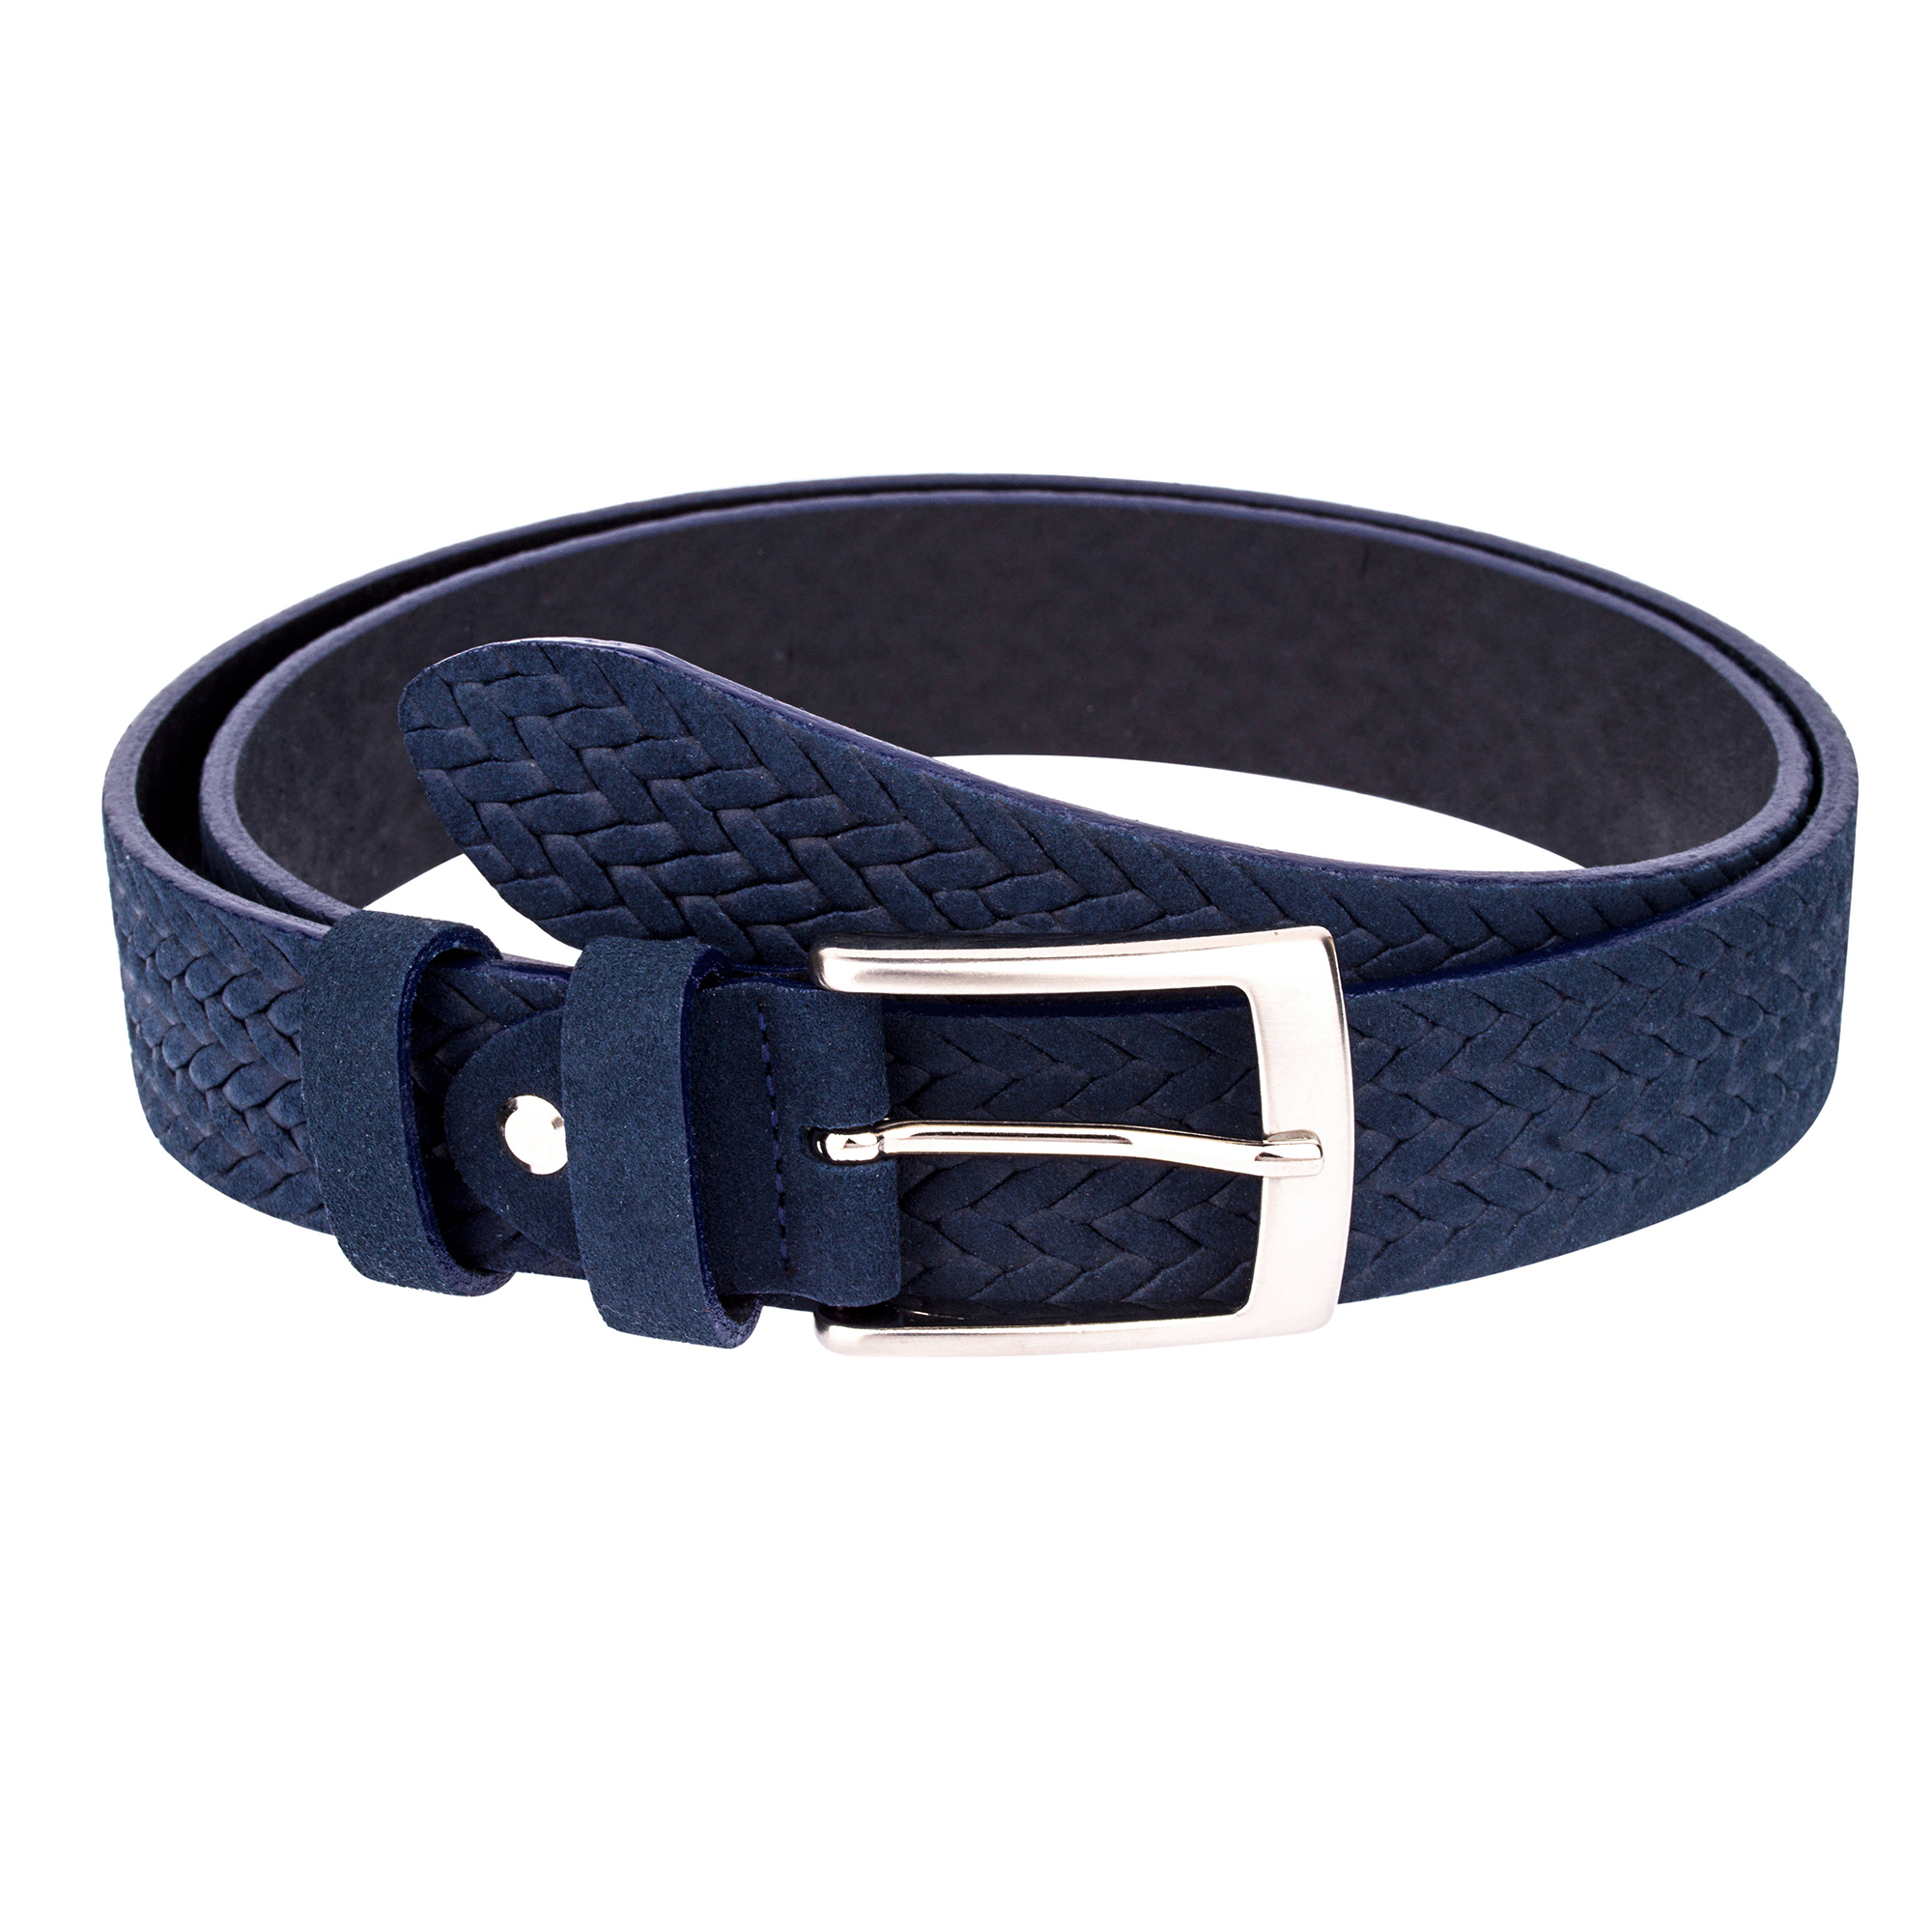 Capo Pelle Woven suede Leather belt Mens belts Women fashion Navy blue  First picture.jpg